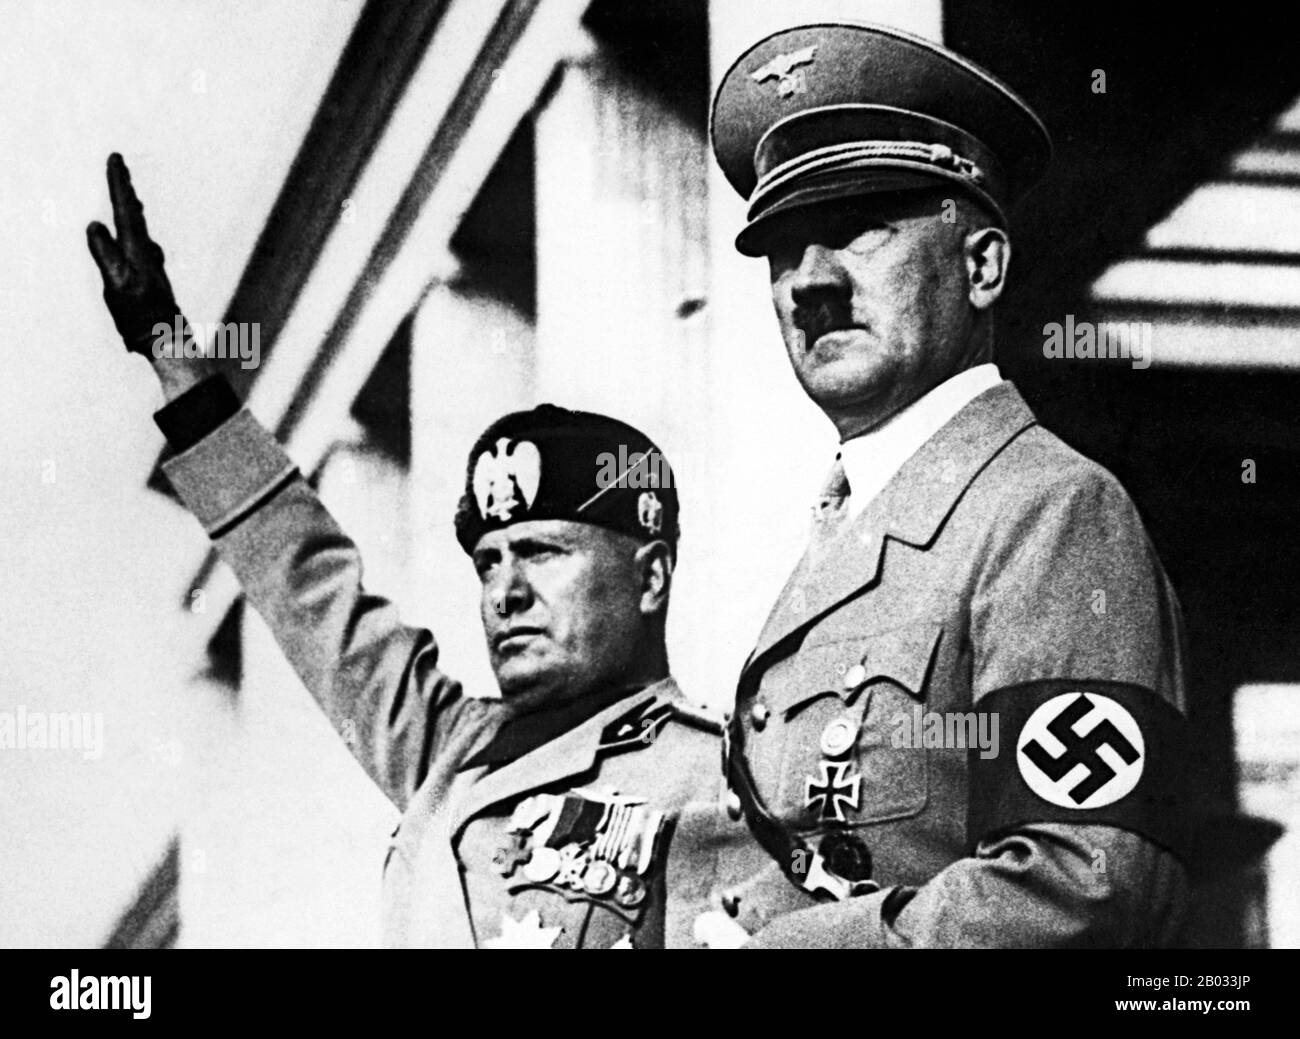 Adolf Hitler (20 April 1889 – 30 April 1945) was a German politician of Austrian origin who was the leader of the Nazi Party (NSDAP), Chancellor of Germany from 1933 to 1945, and Führer ('leader') of Nazi Germany from 1934 to 1945.  As dictator of Nazi Germany he initiated World War II in Europe and was a central figure of the Holocaust.  Benito Amilcare Andrea Mussolini (29 July 1883 – 28 April 1945) was an Italian politician, journalist, and leader of the National Fascist Party, ruling the country as Prime Minister from 1922 until he was ousted in 1943.  He ruled constitutionally until 1925, Stock Photo